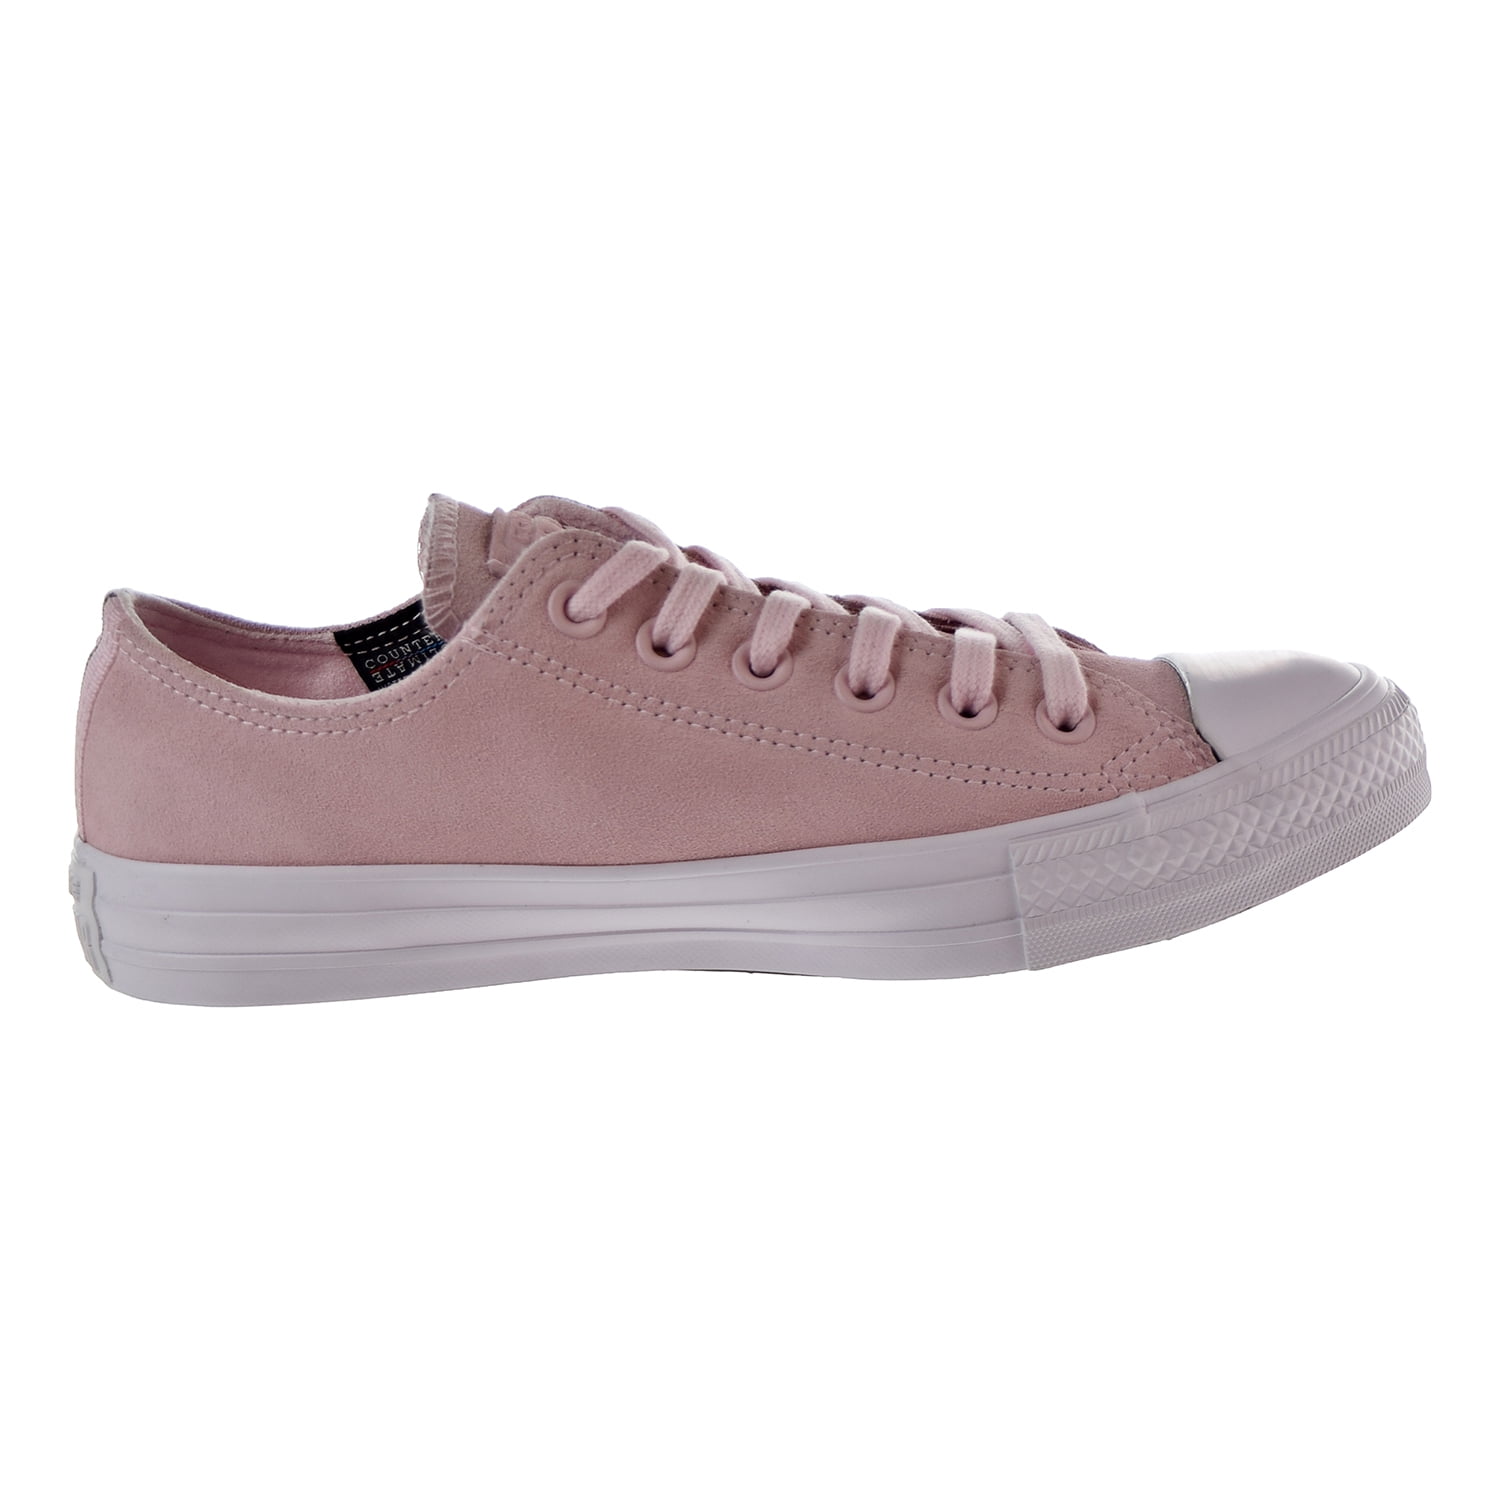 Converse Chuck Taylor All Star Ox Counter Climate Unisex Shoes Pink 159349c